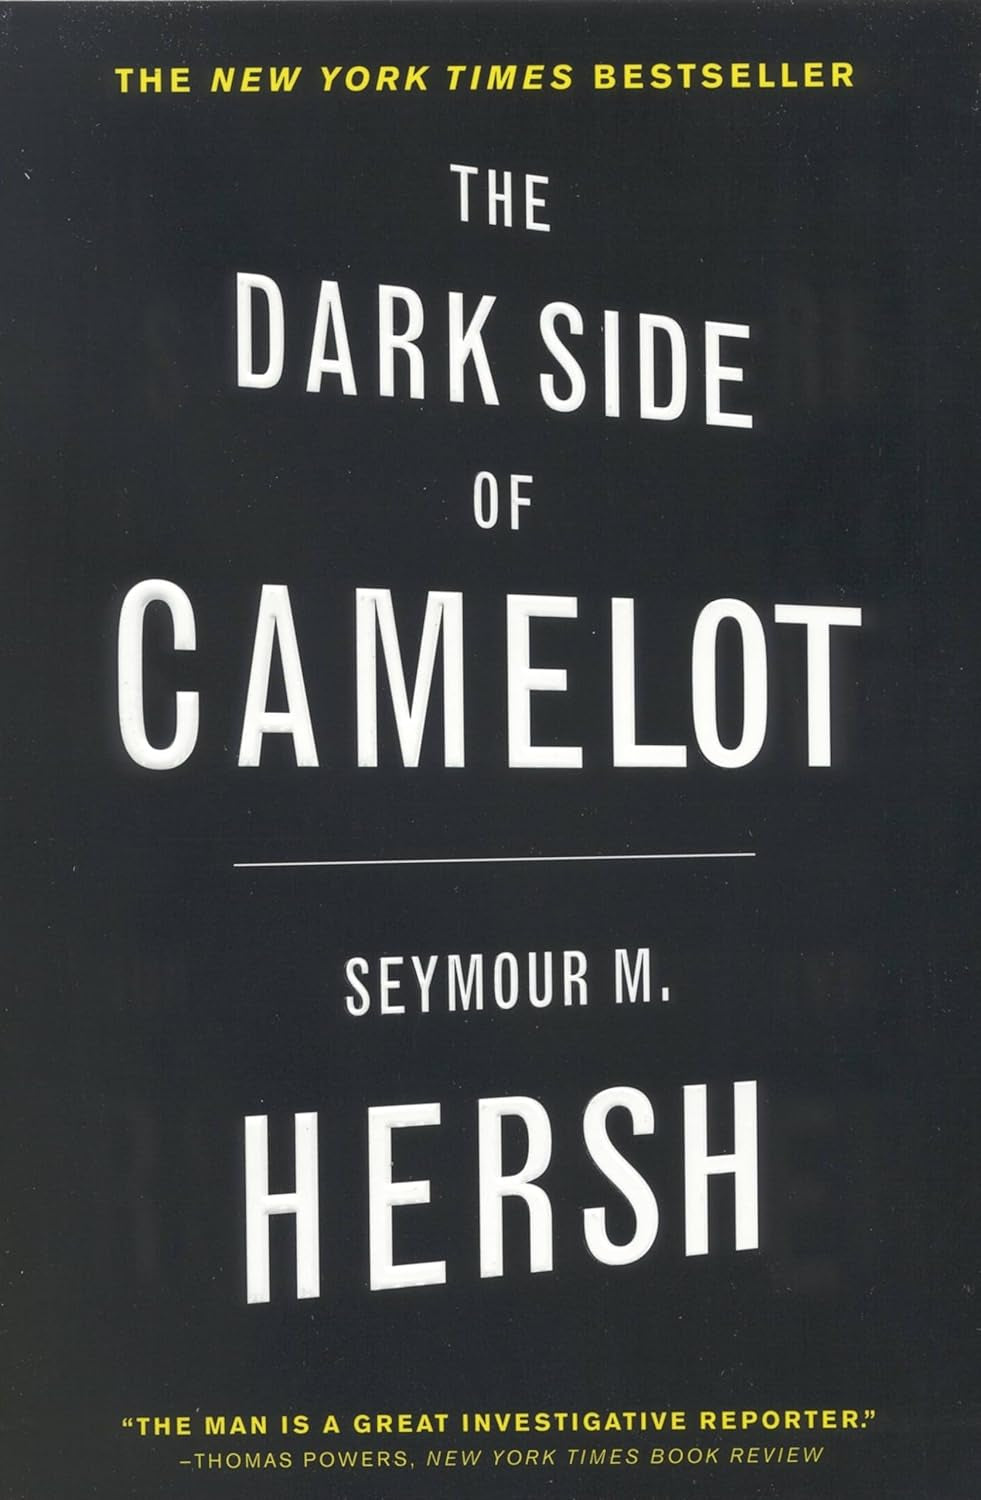 The Dark Side of Camelot - Seymour M. Hersh - Paperback